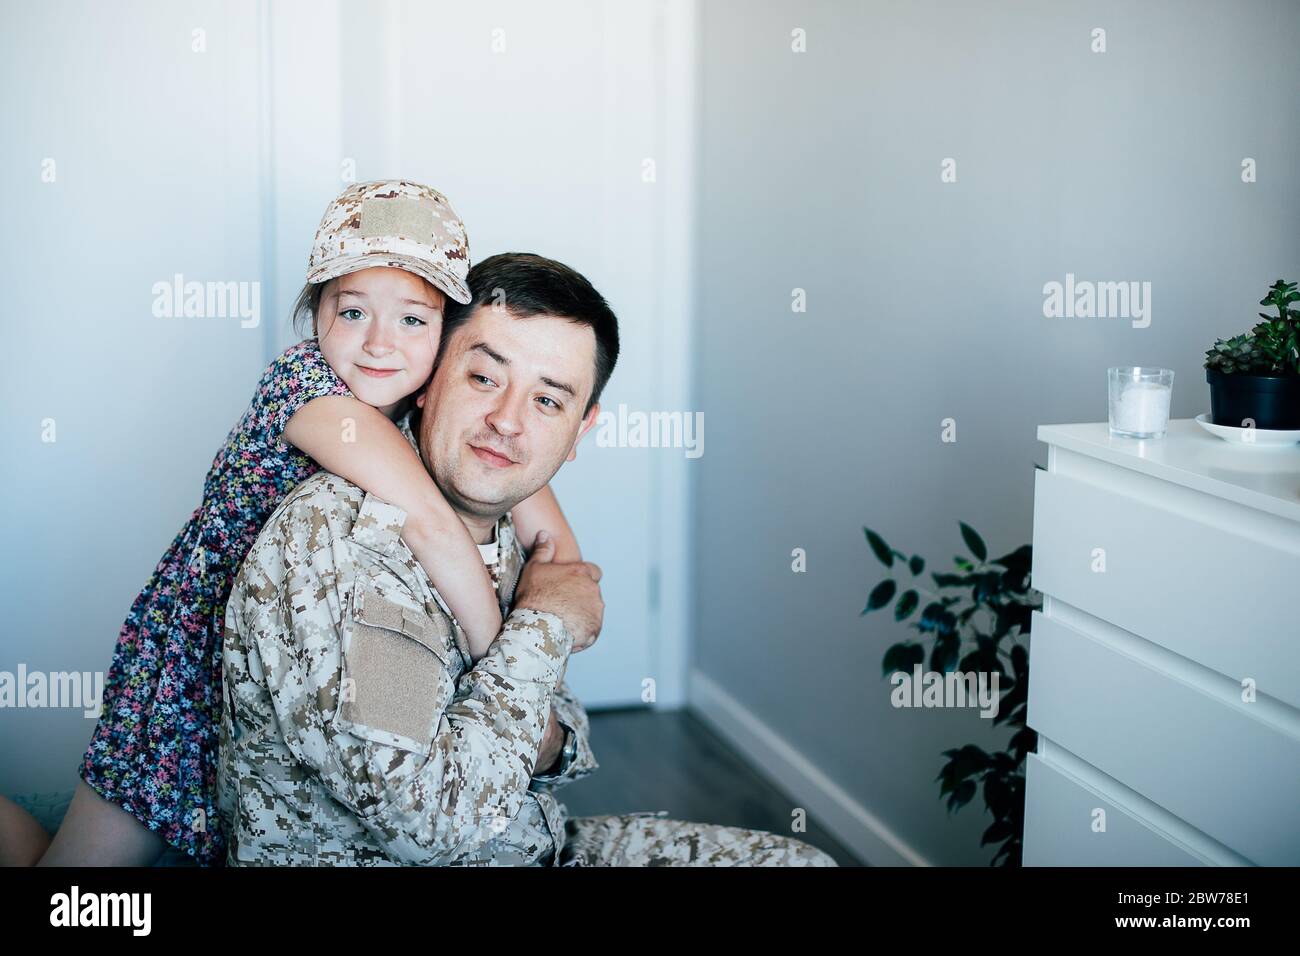 Military man father hugs daughter. Portrait of happy american family. Stock Photo